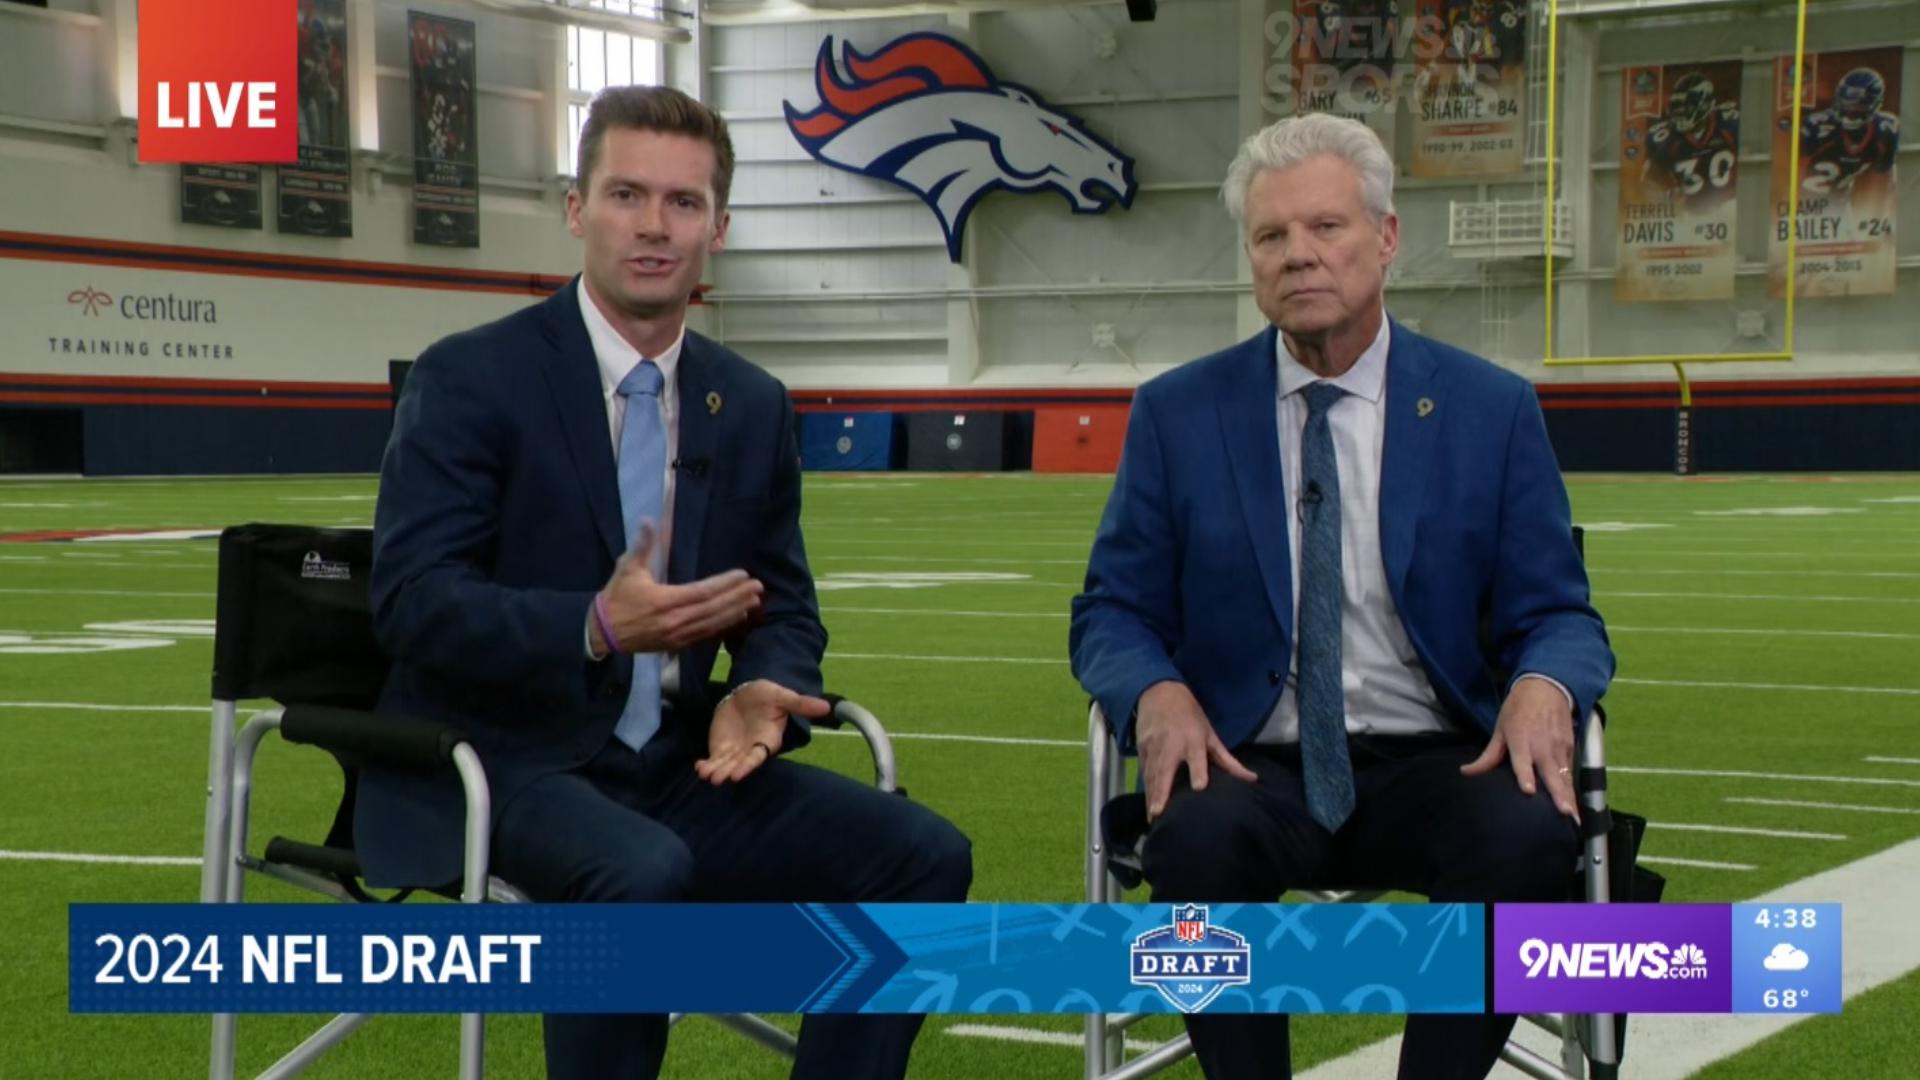 Scotty Gange and Mike Klis discuss the 2024 NFL Draft from Denver Broncos headquarters.